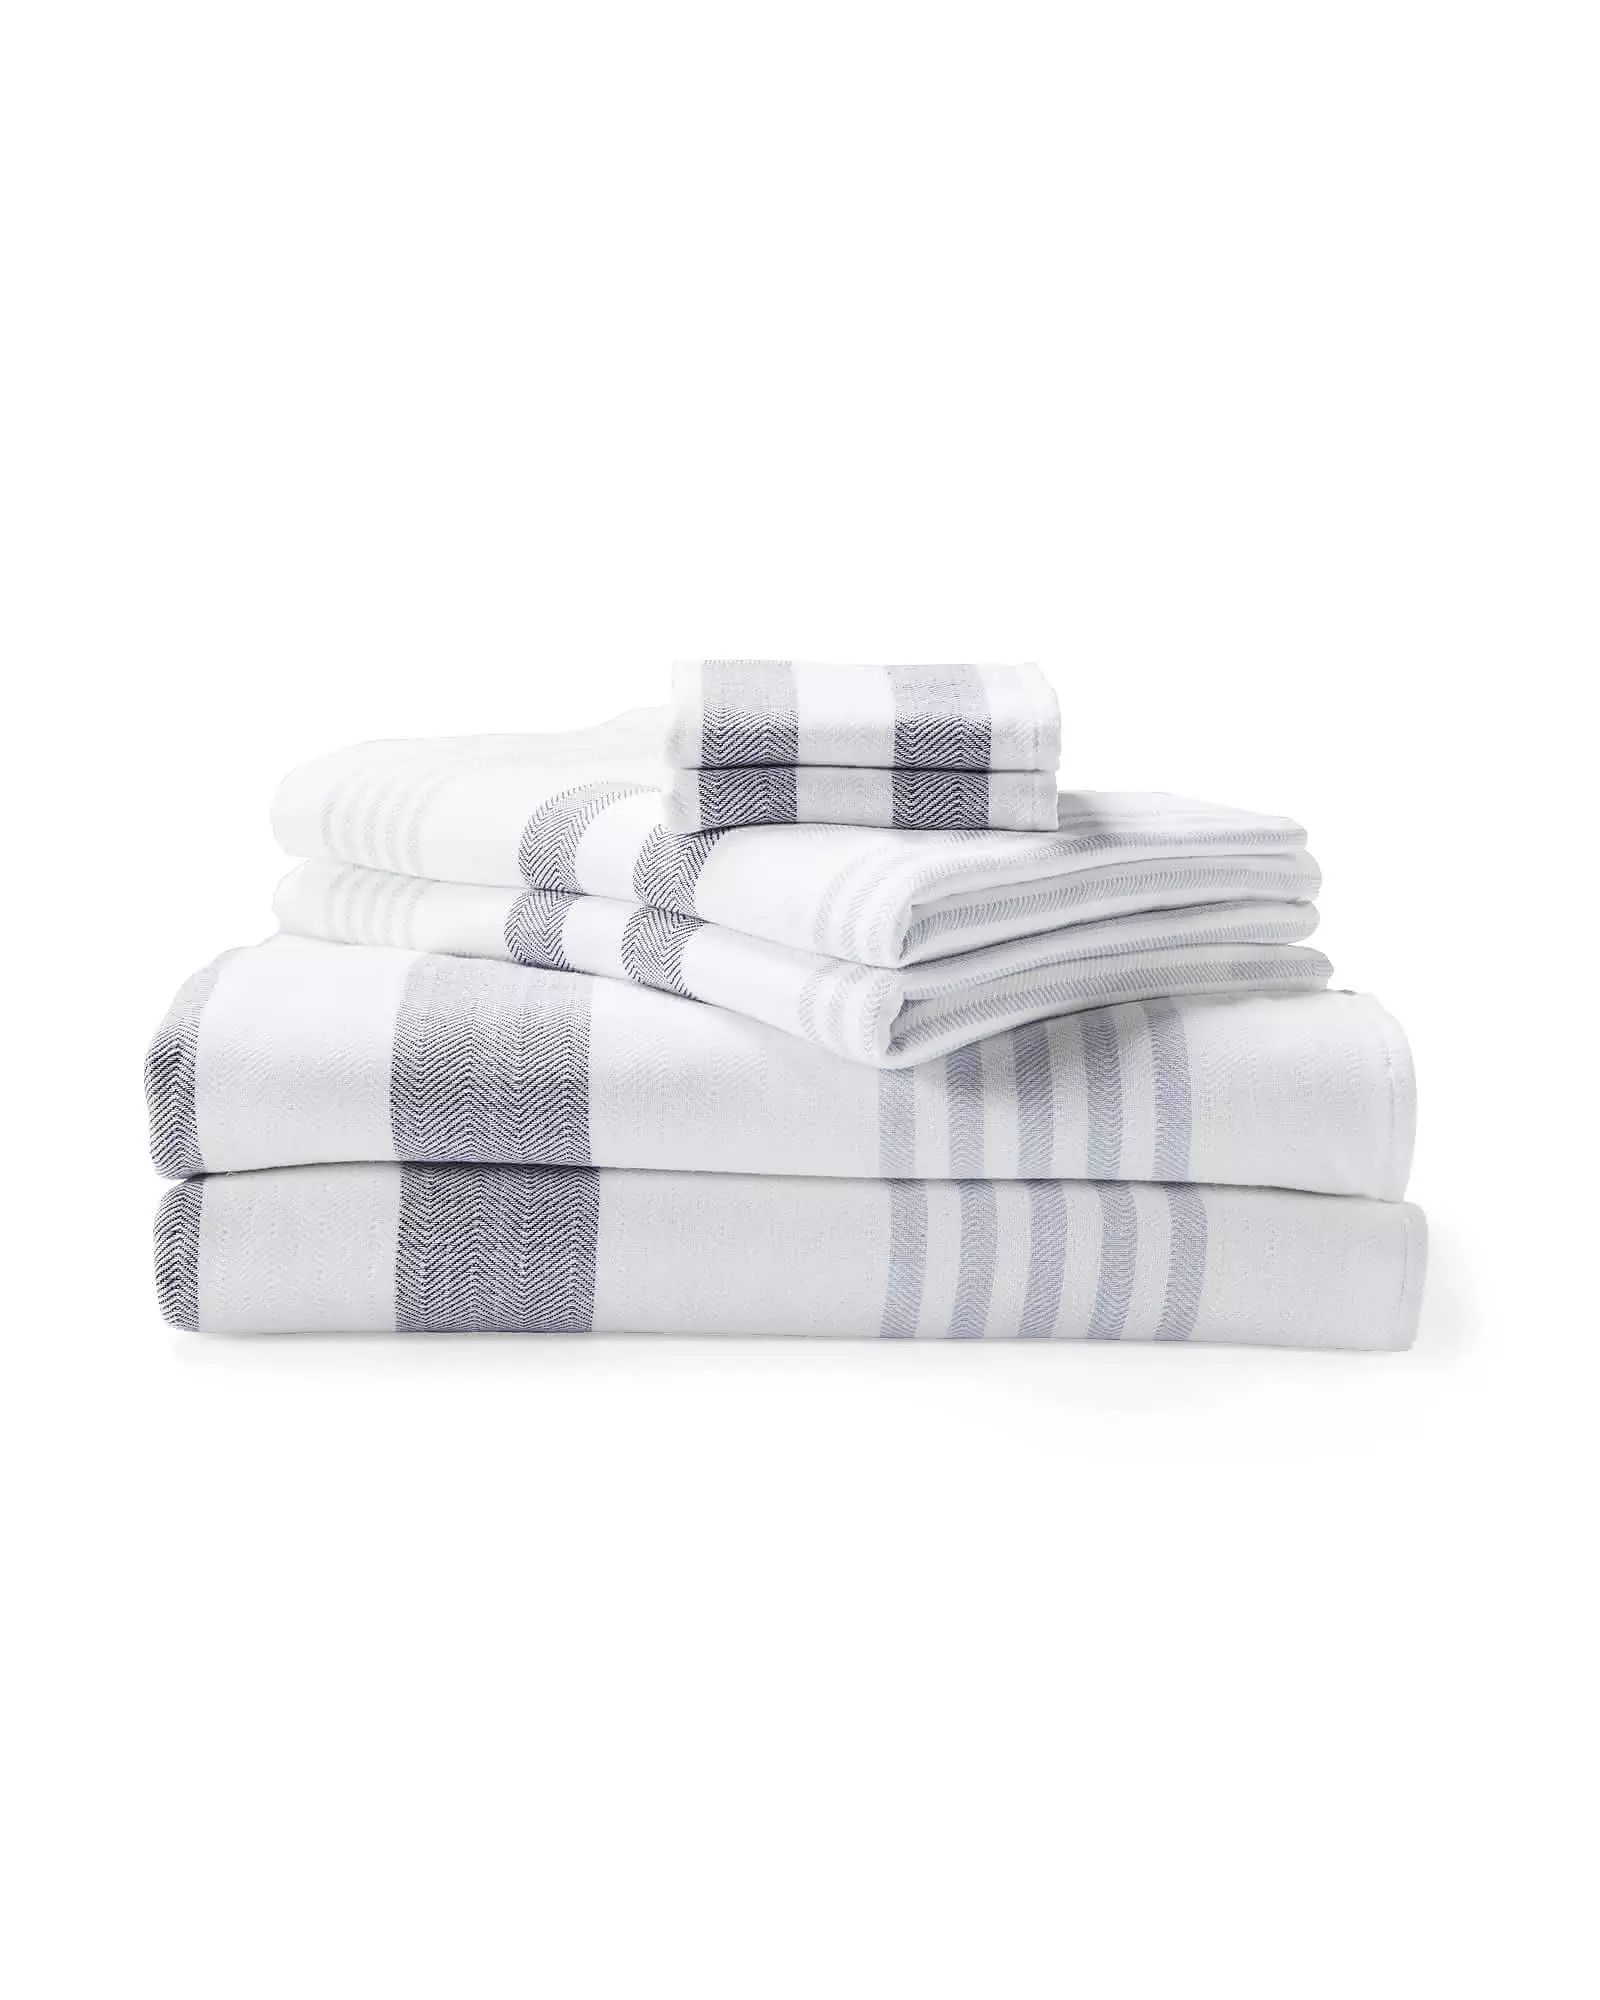 Fouta Turkish Cotton Bath Collection | Serena and Lily